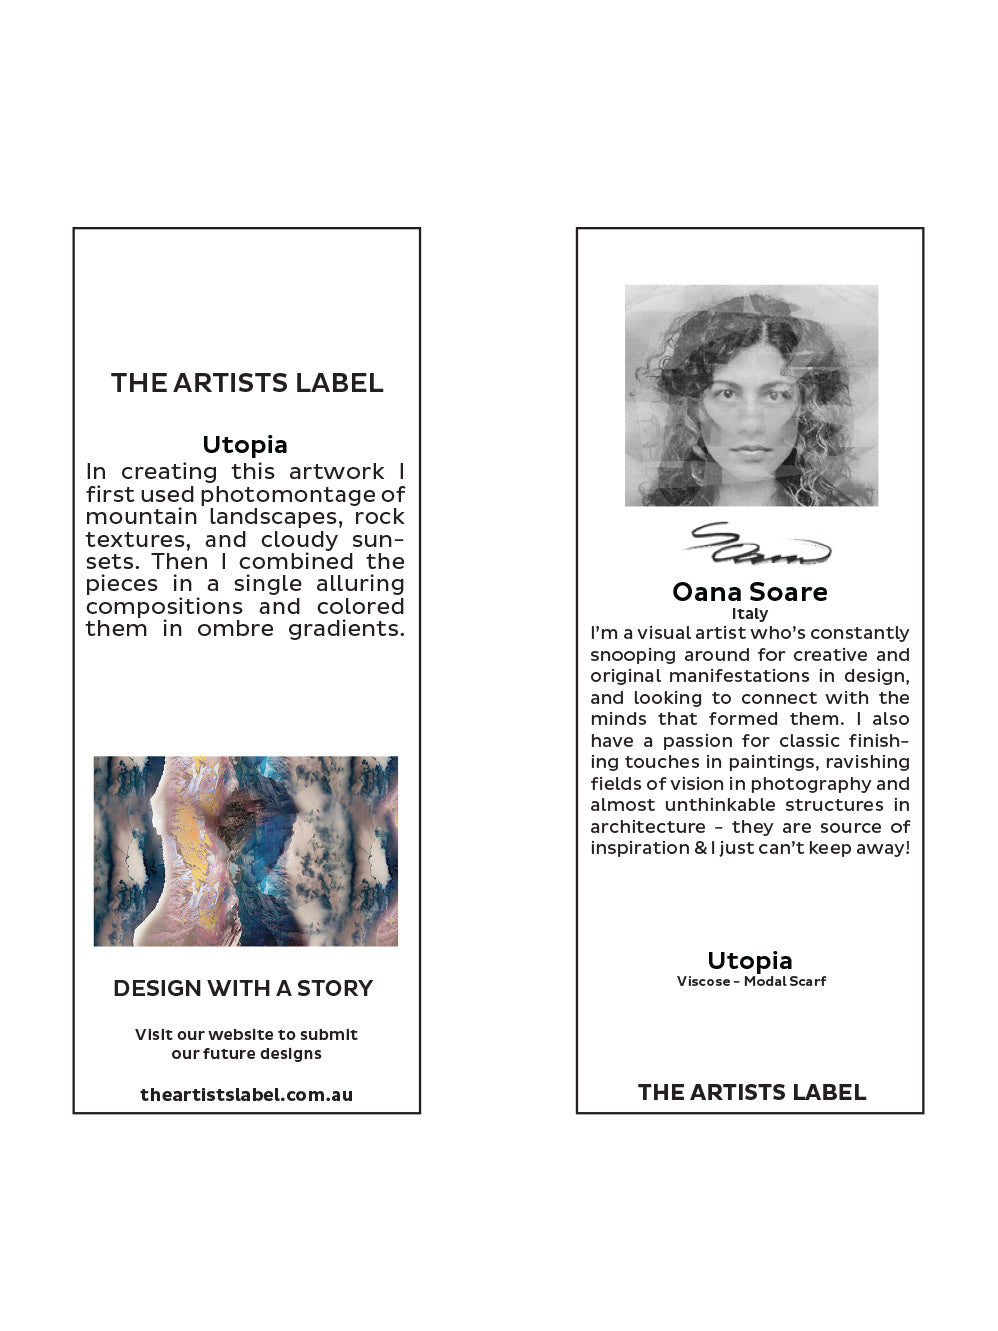 THE ARTISTS LABEL UTOPIA SCARF